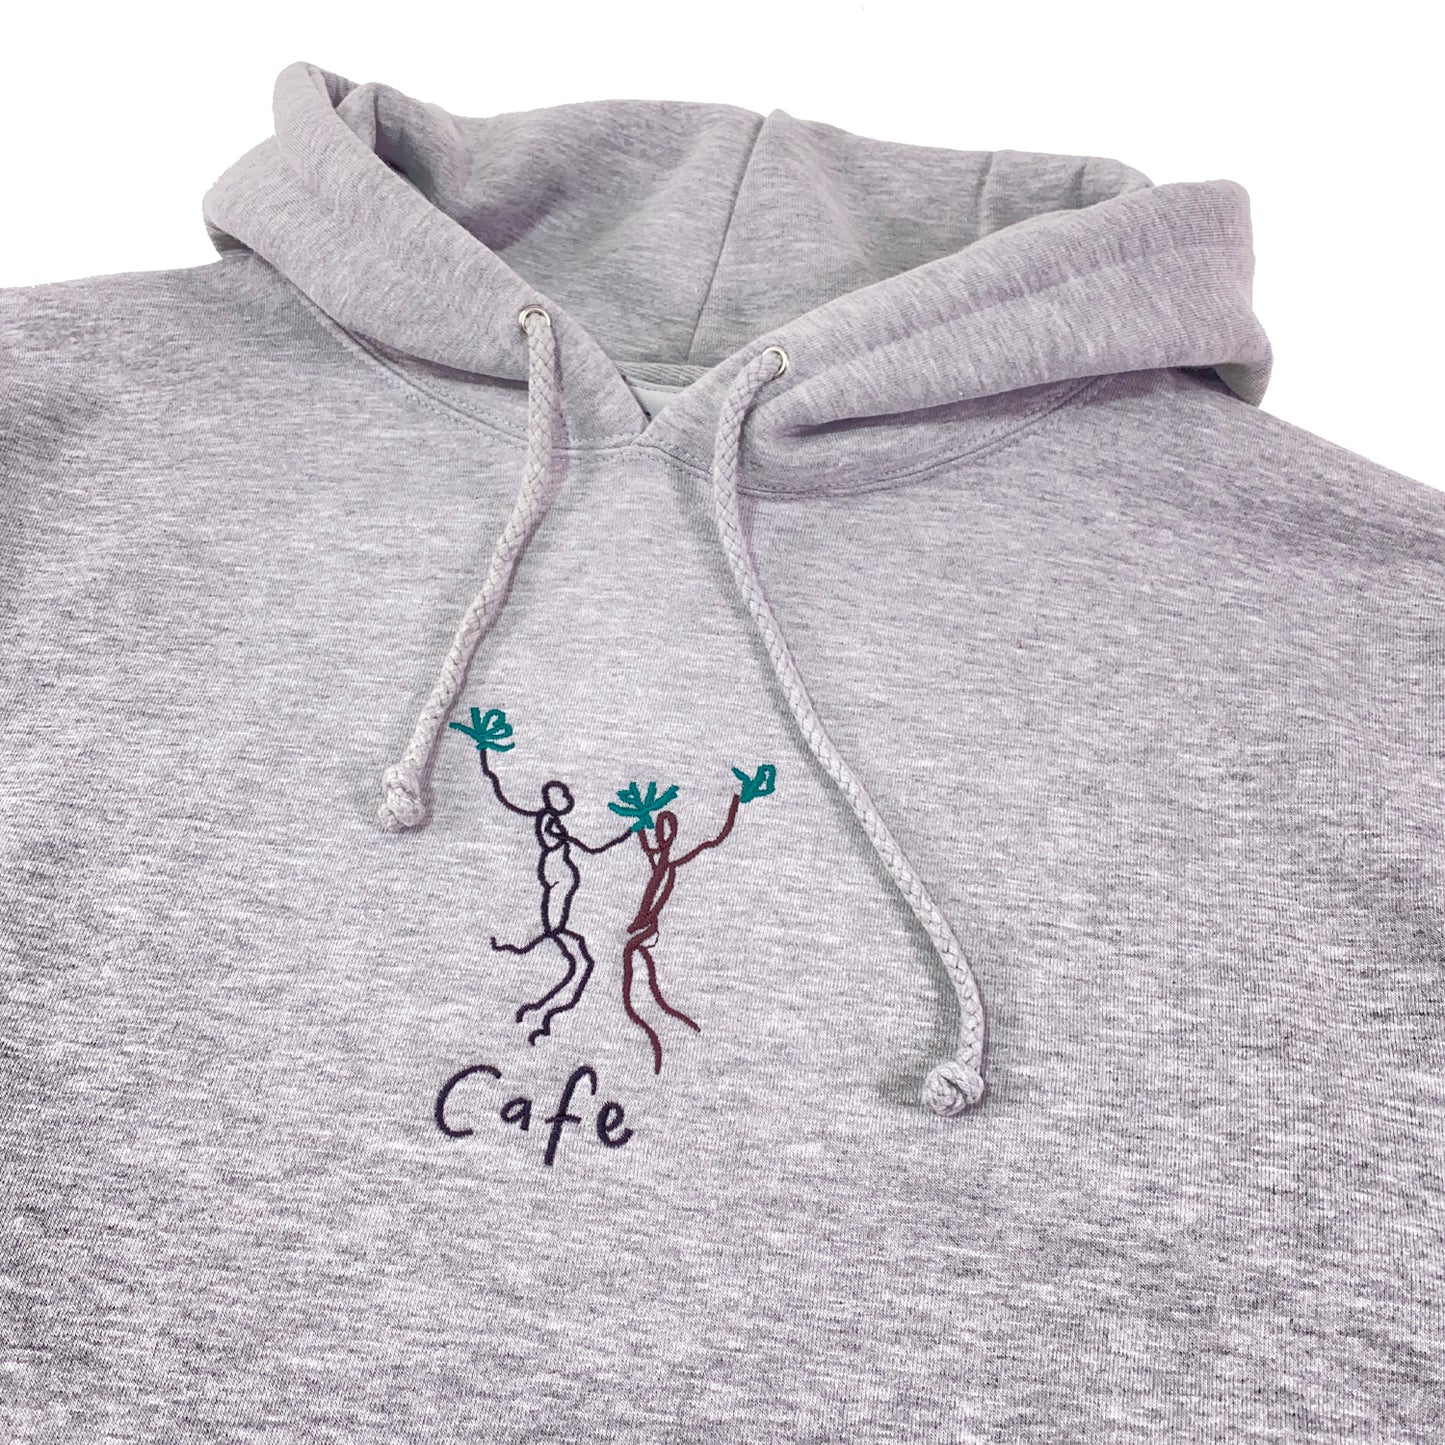 Skateboard Cafe - Unity Embroidered Hooded Sweat - Heather Grey - Prime Delux Store